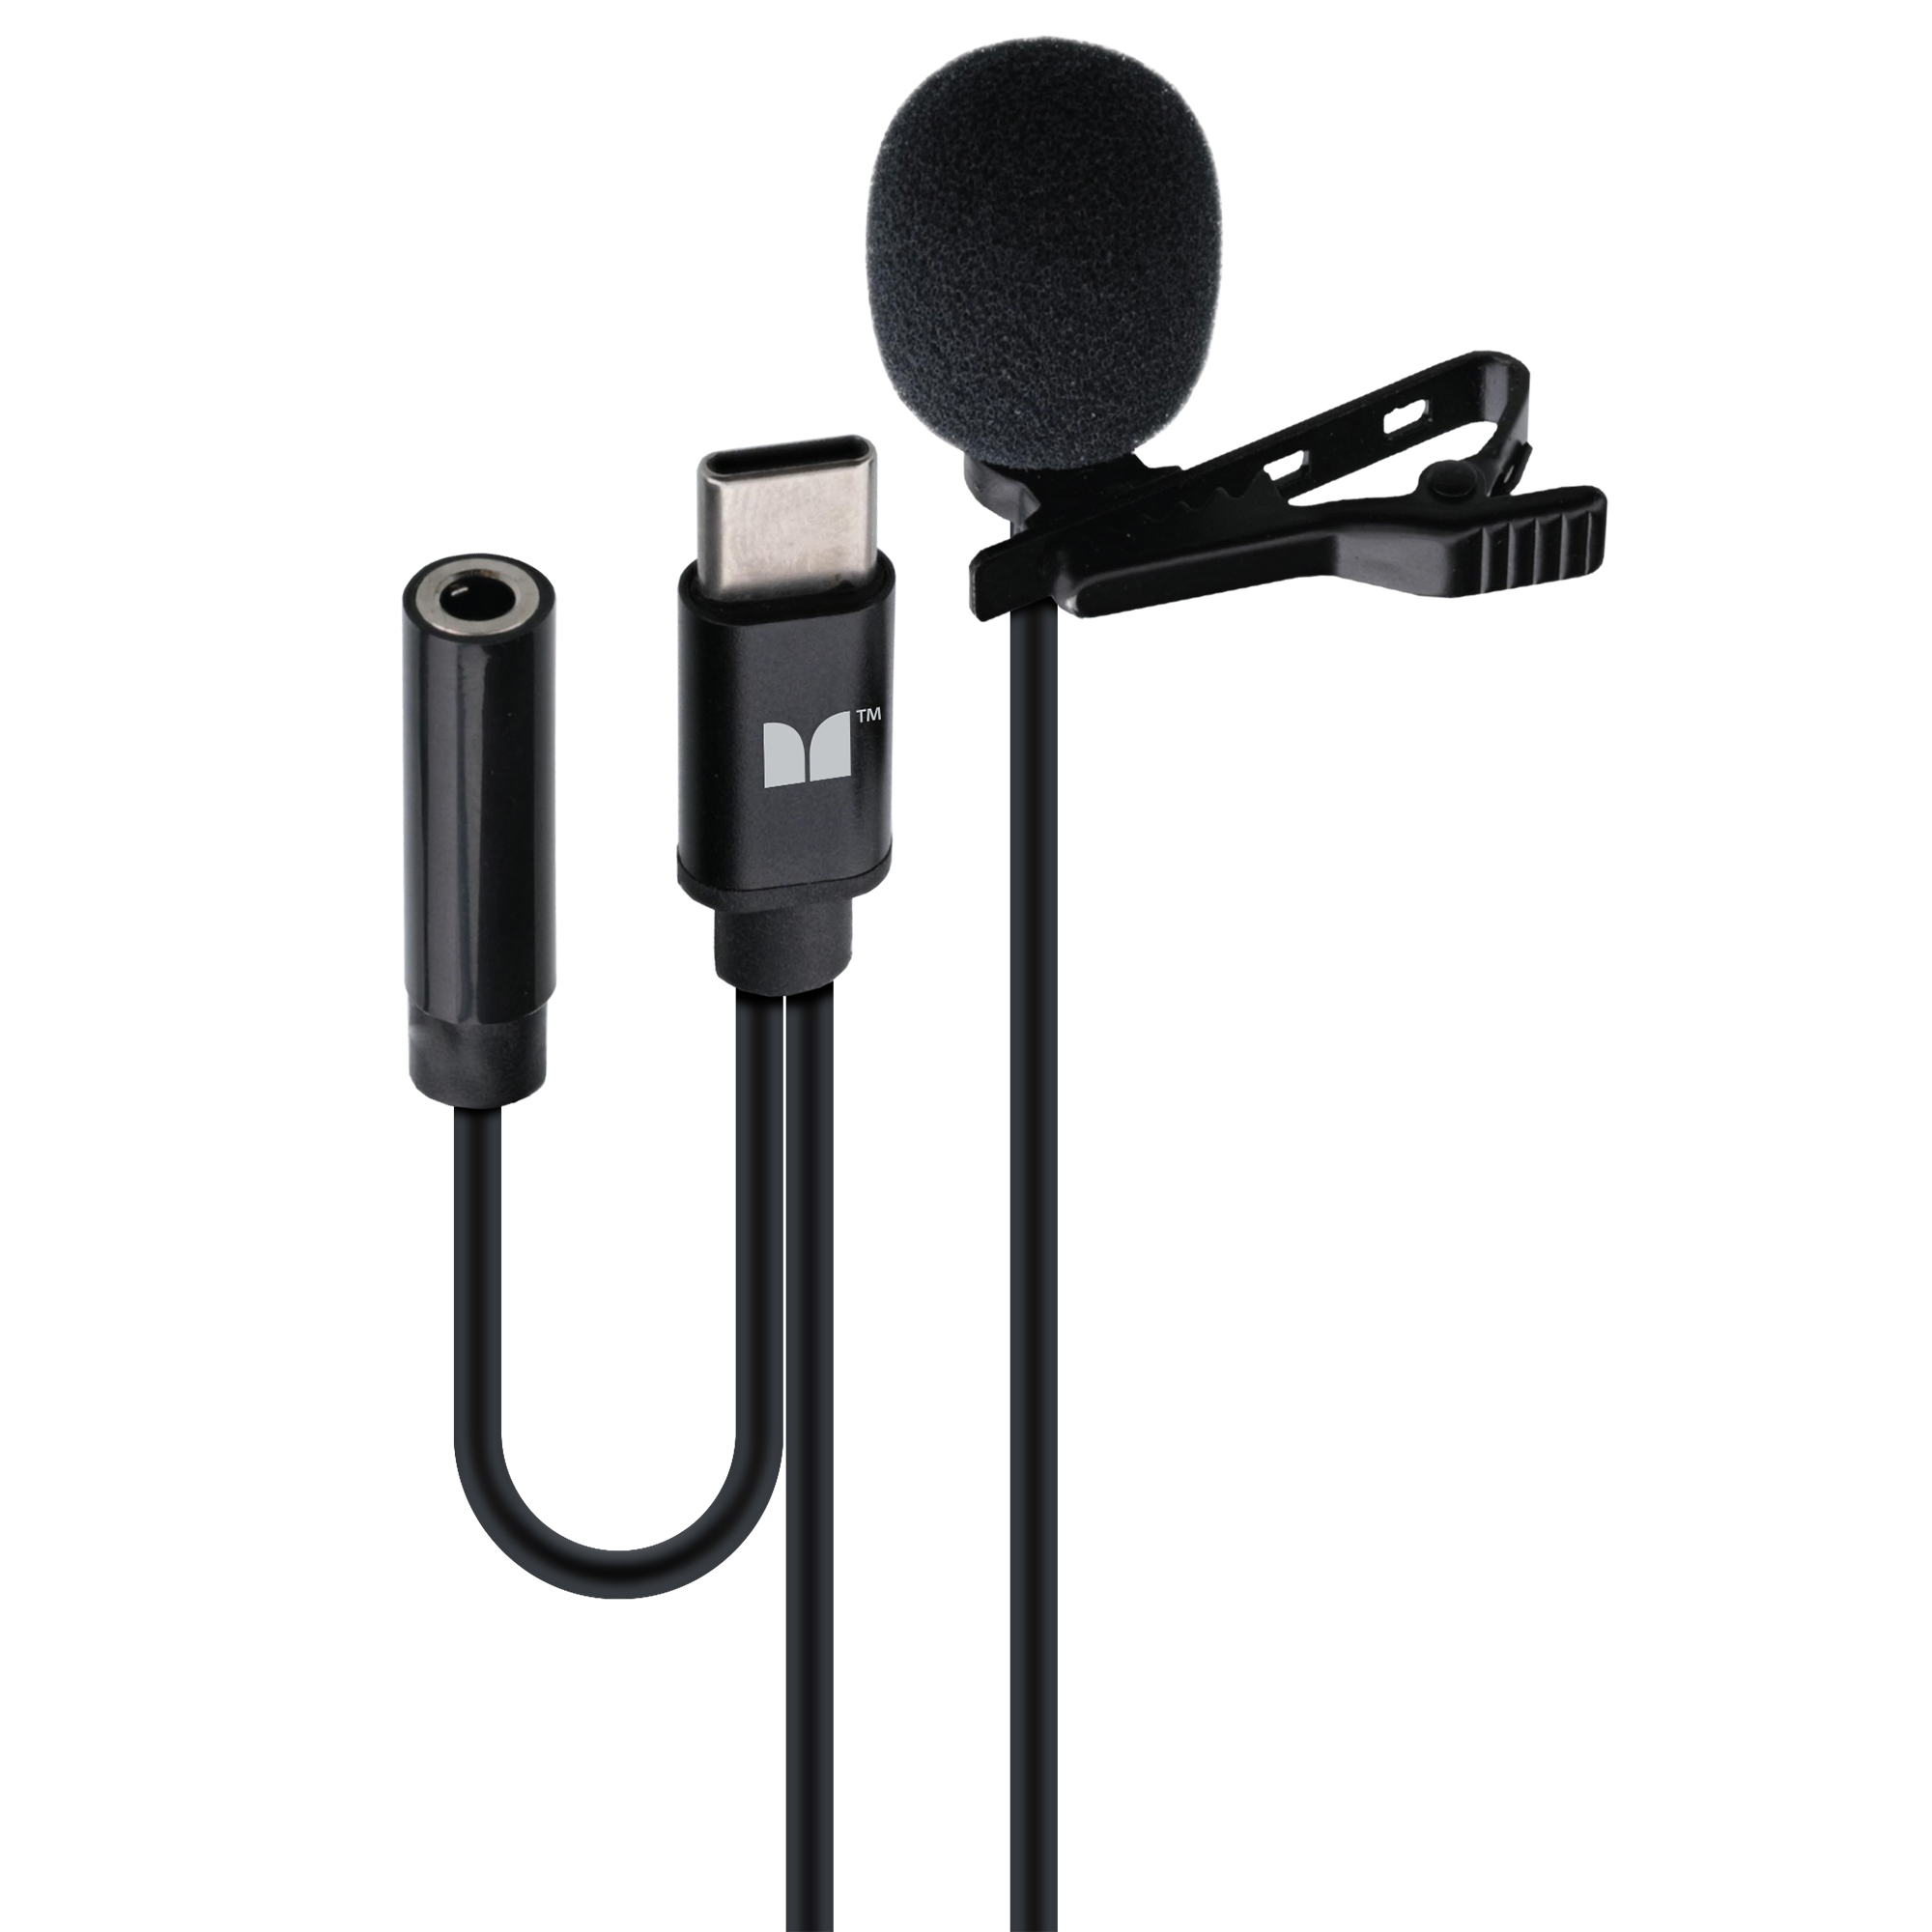 Monster Lavalier Clip-on Microphone, Mic For Type-C USB Ports, Universal Device Support - image 5 of 5